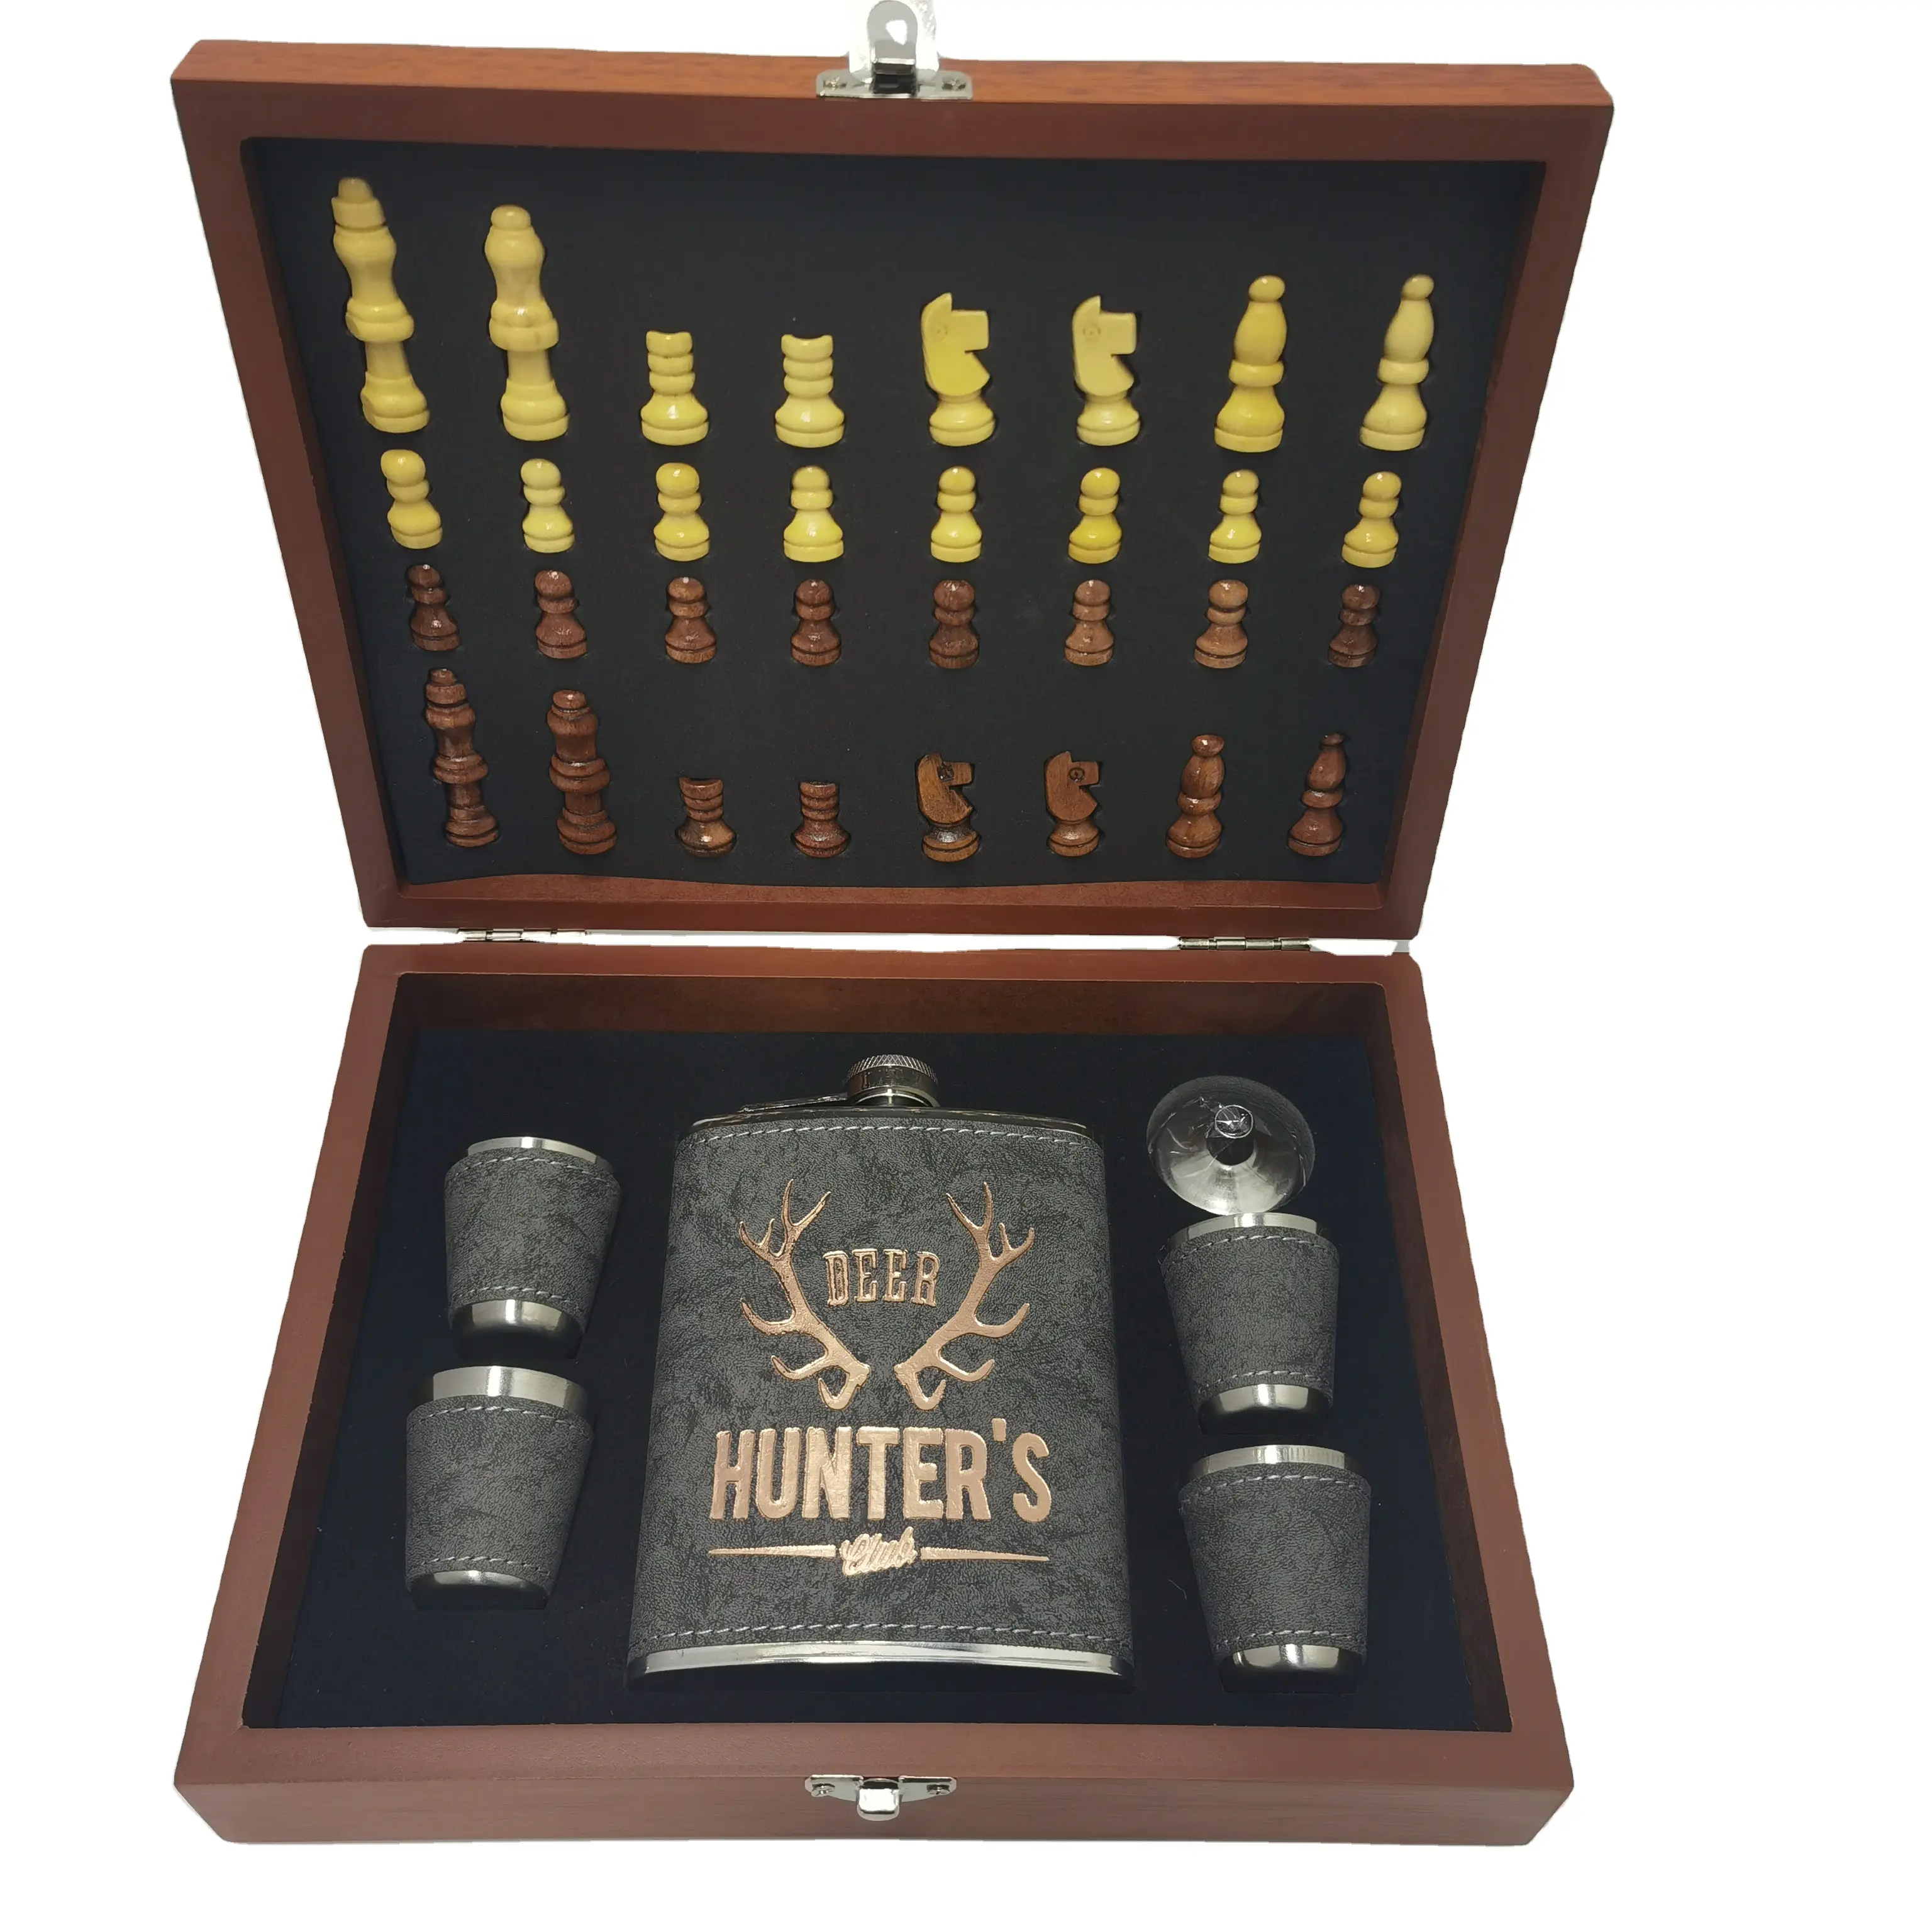 2024 popular Whiskey Liquor Hip Flask with funnel and shot glass In Wooden Gift box Stainless steel Hip Flask set with chess